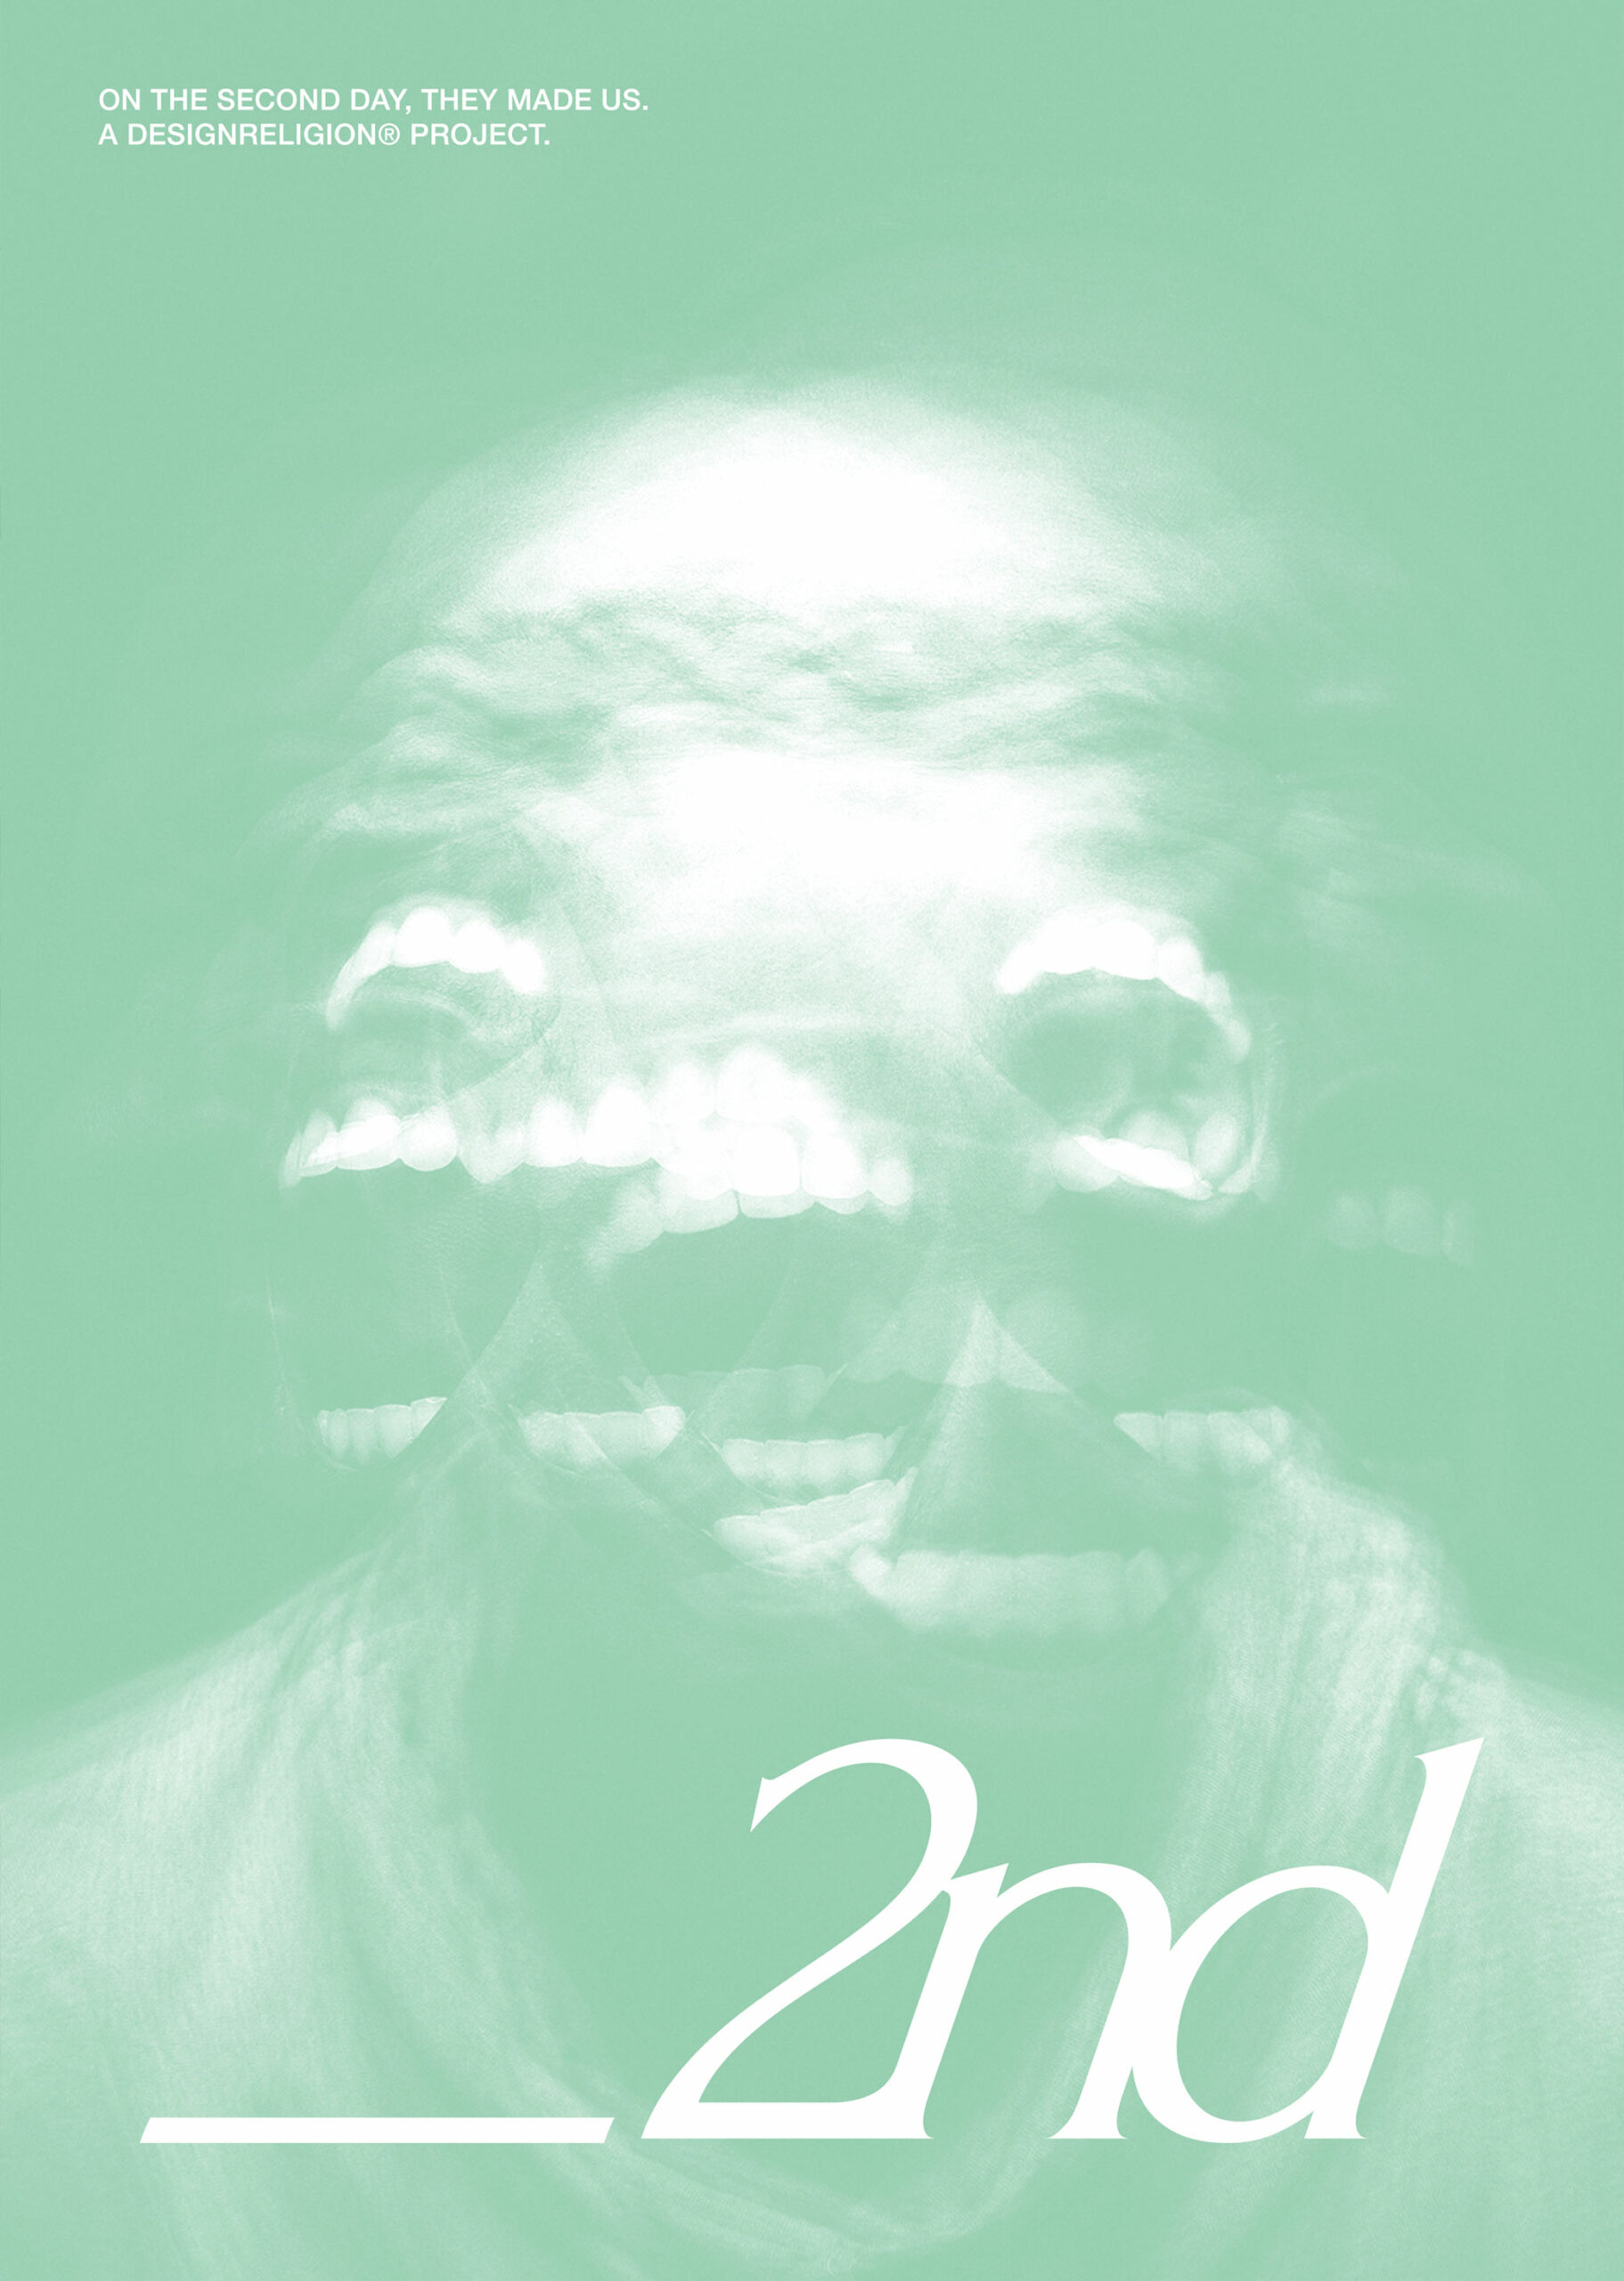 Experimental poster design with image of screaming person, a Second Day logo and strapline